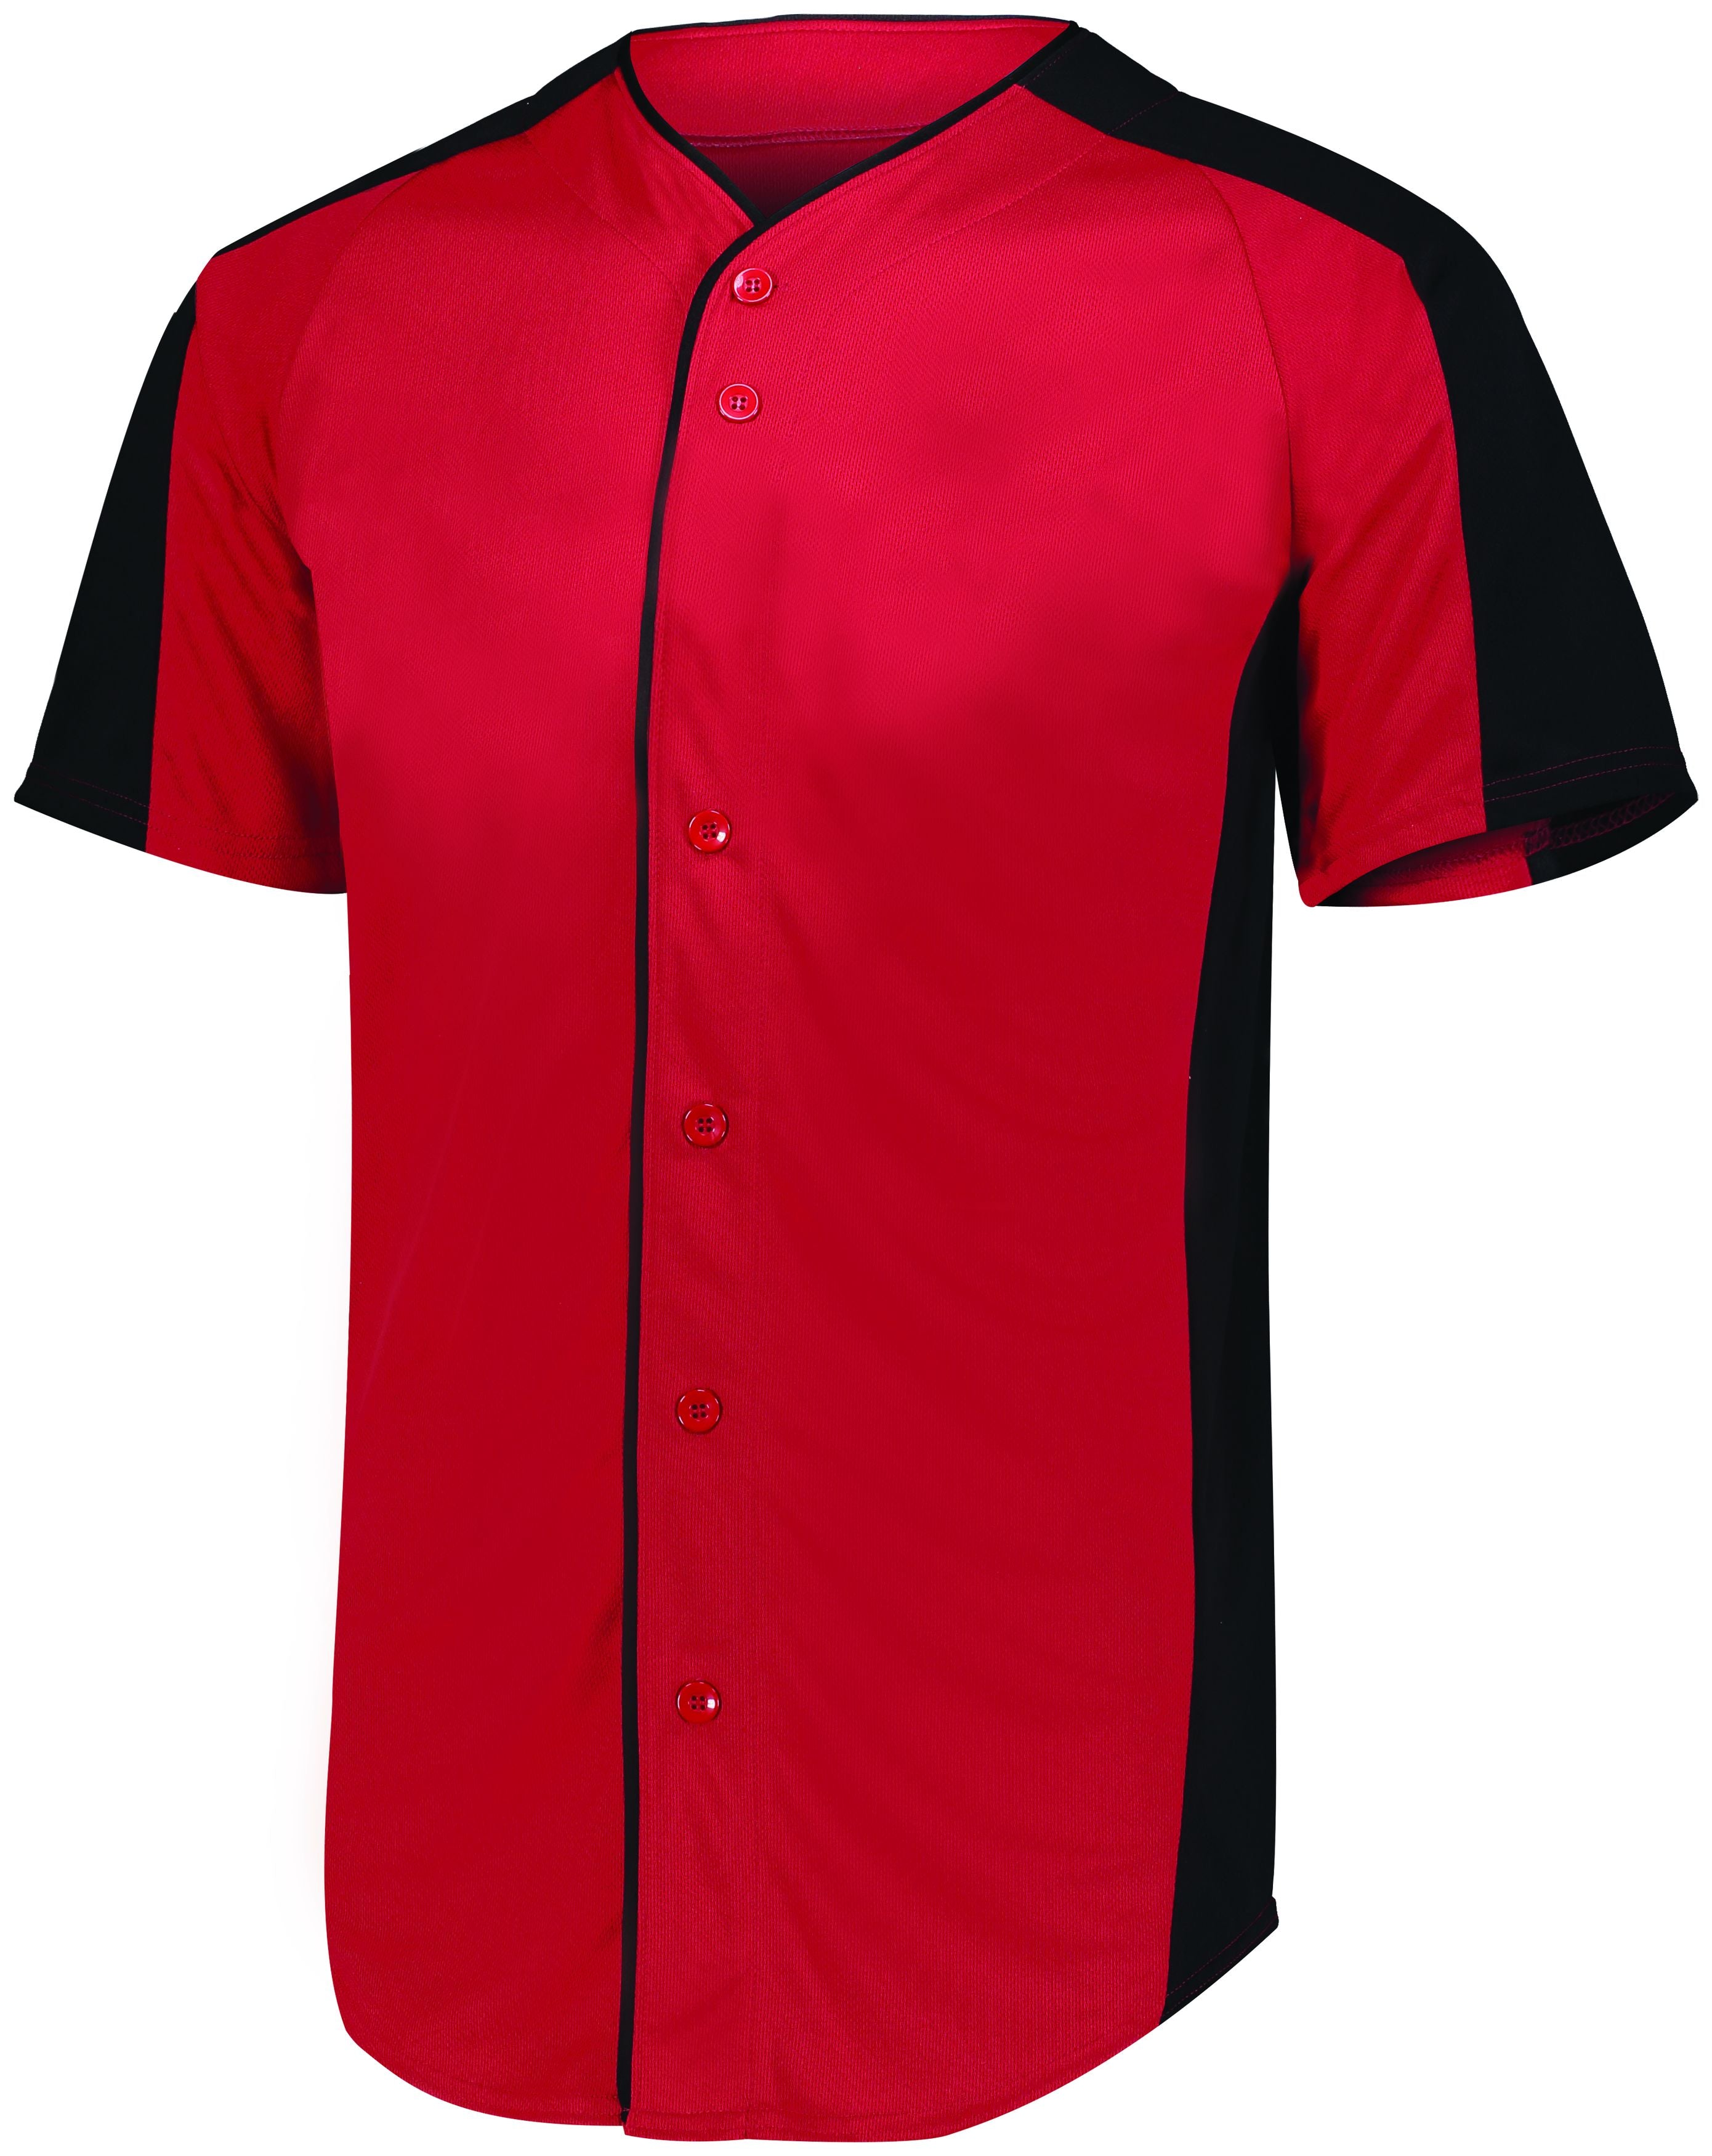 Augusta Sportswear Full-Button Baseball Jersey in Red/Black  -Part of the Adult, Adult-Jersey, Augusta-Products, Baseball, Shirts, All-Sports, All-Sports-1 product lines at KanaleyCreations.com